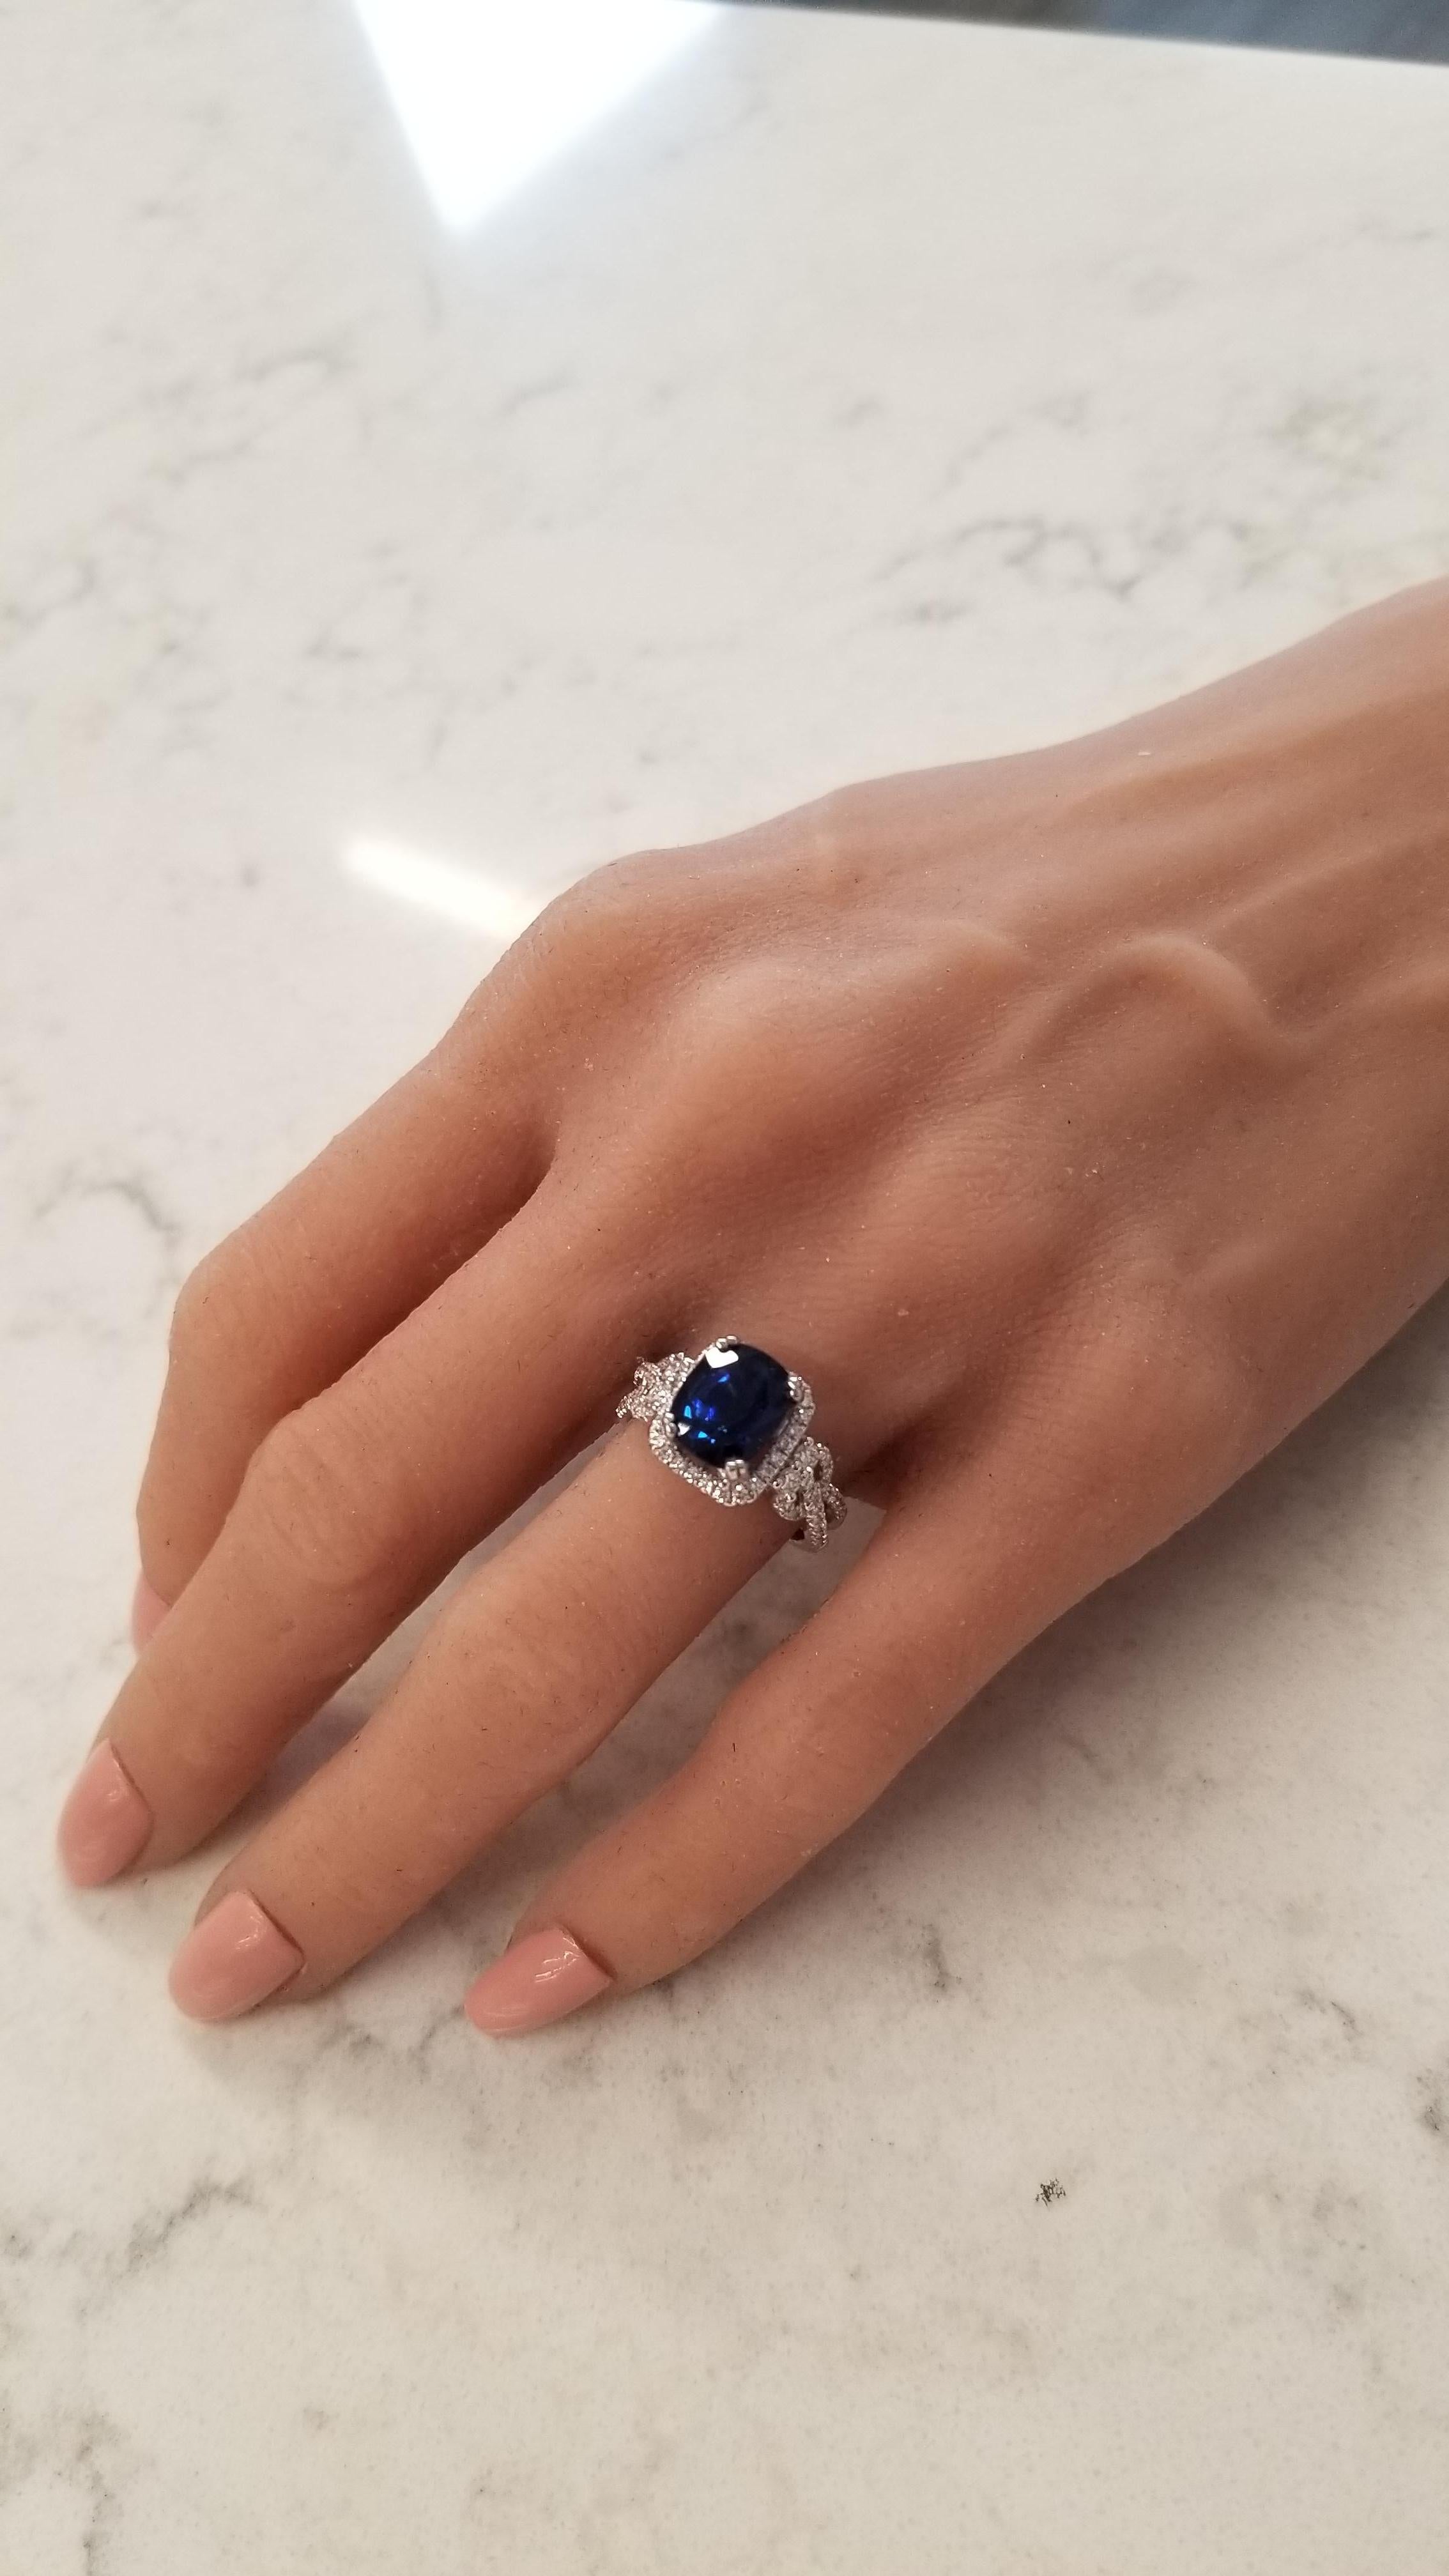 This is a 3.86 carat cushion cut blue sapphire that measures 9.56x7.82mm. The gem source is Sri Lanka; its color is royal blue and it is evenly distributed throughout the gem. Its luster and transparency is superb. Sparkling round brilliant cut